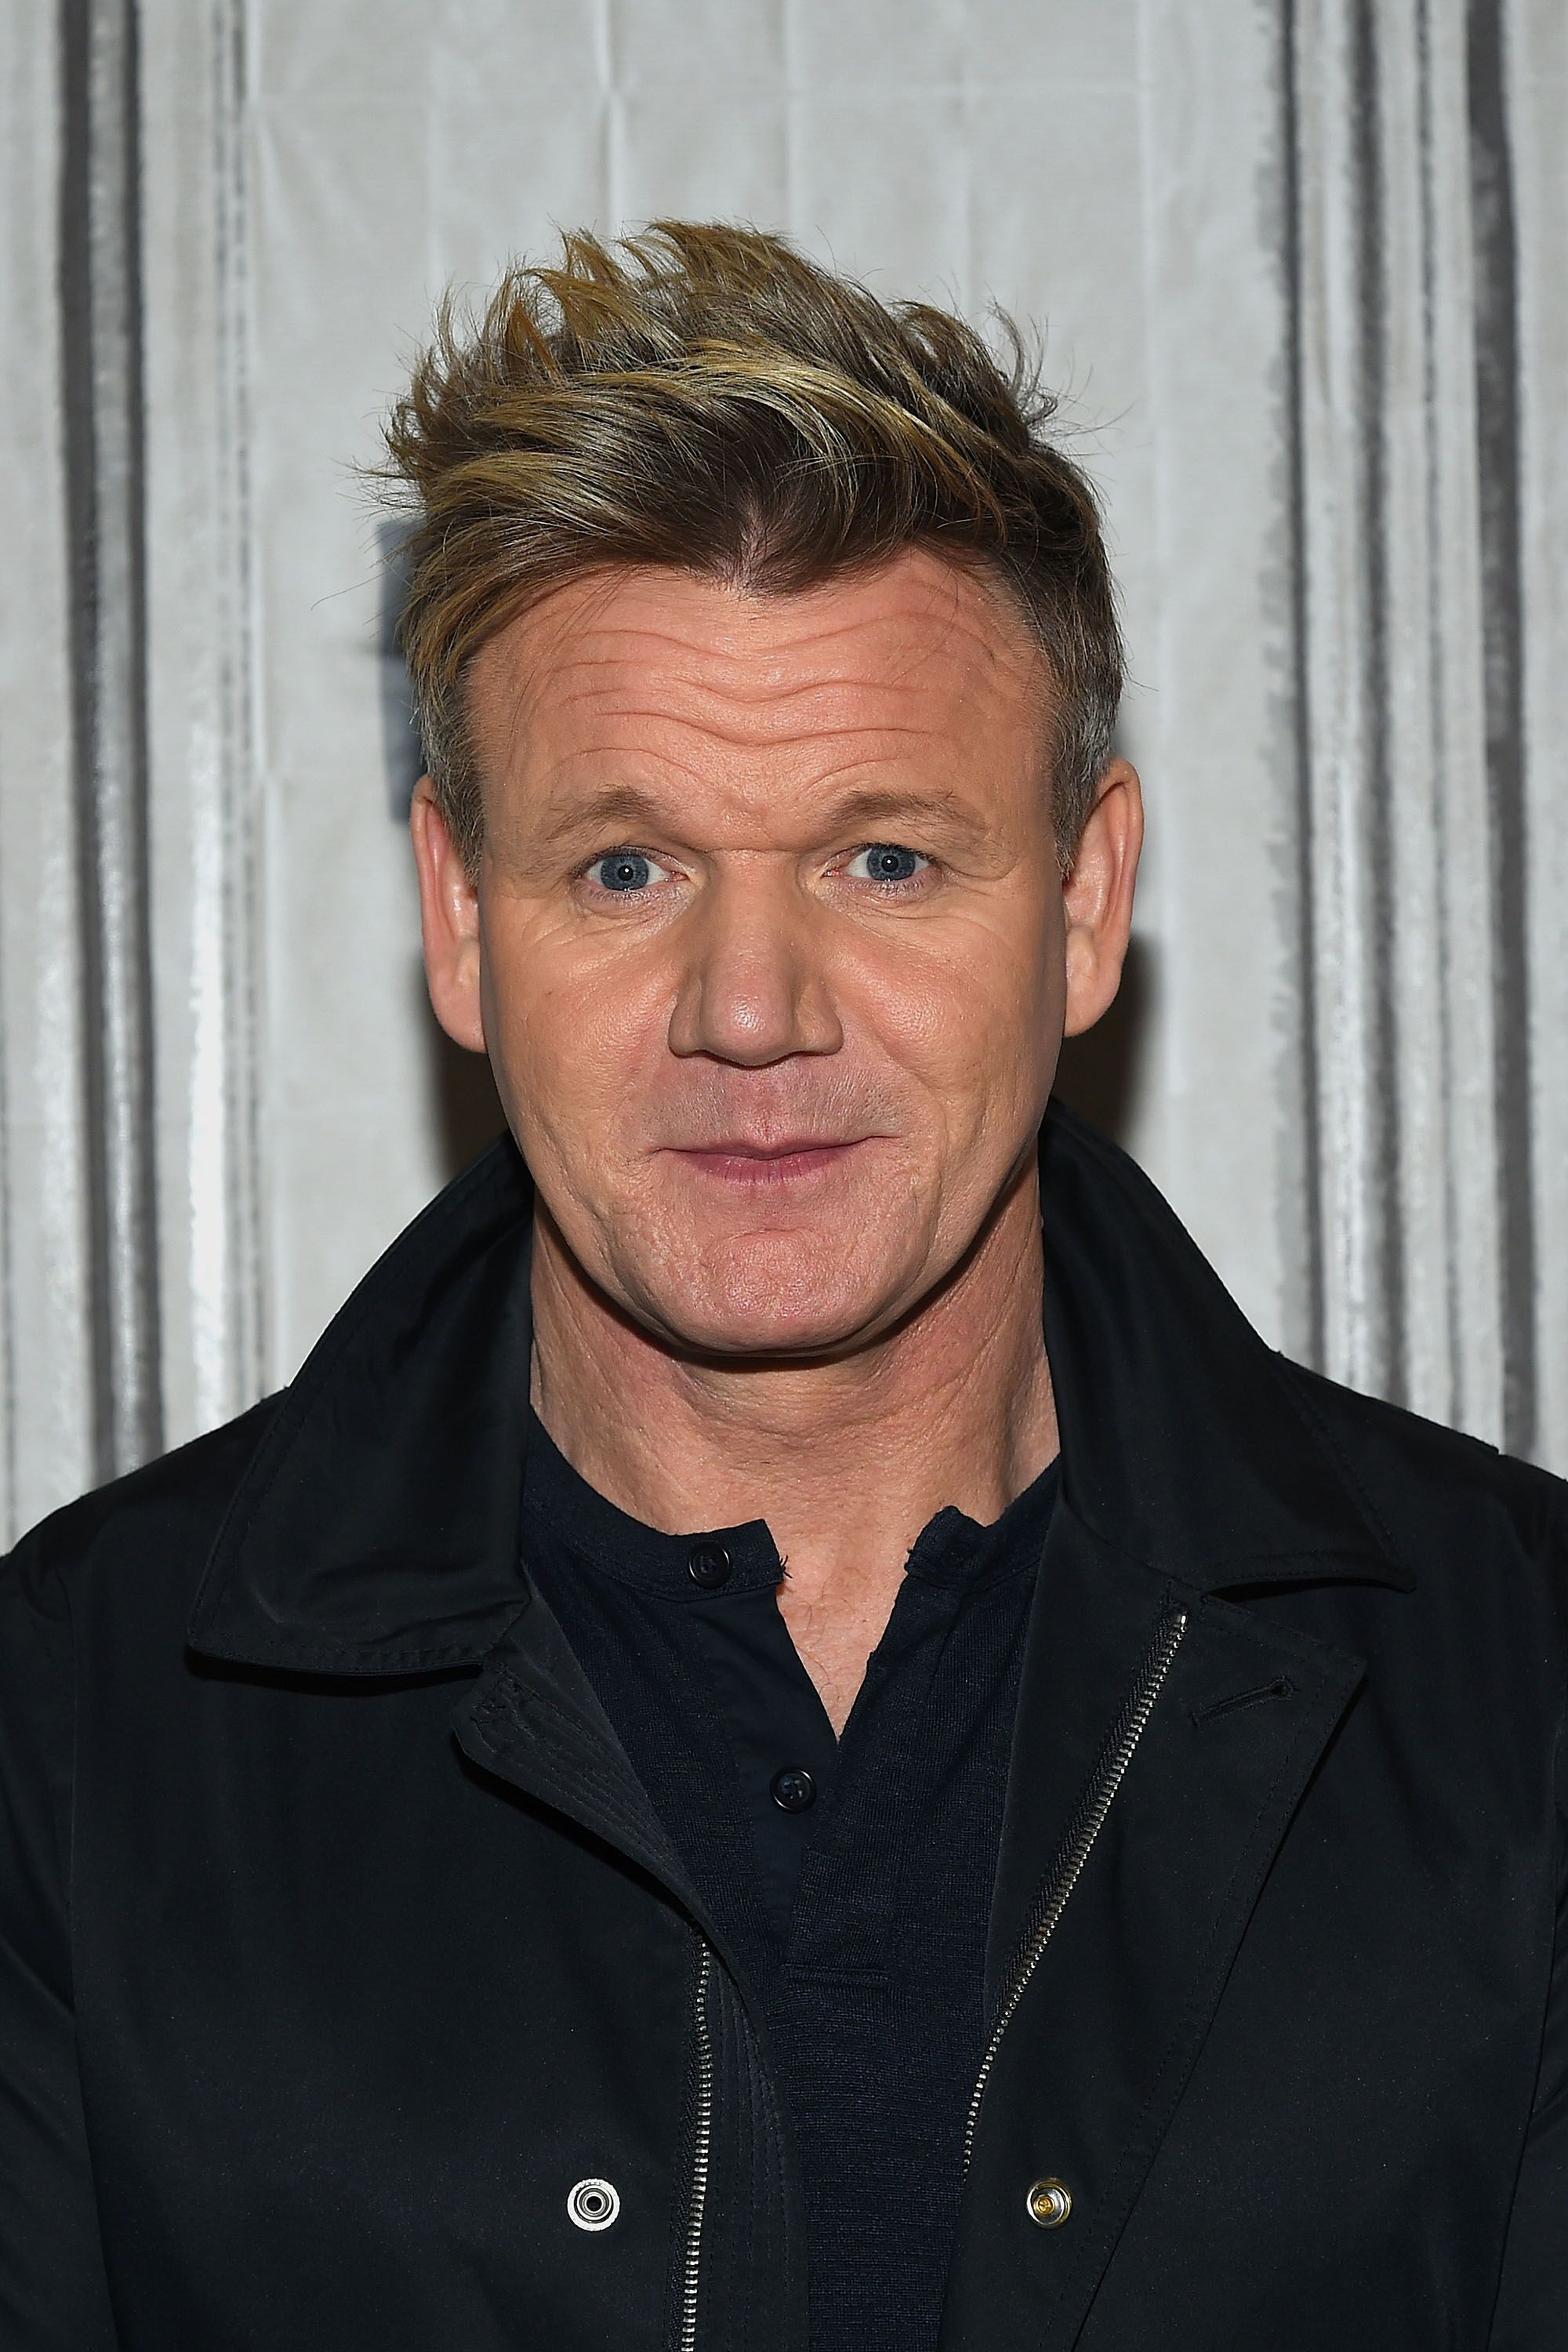  Celebrity Chef Gordon Ramsay attends the Build Series to discuss "MasterClass: Gordon Ramsay Teaches Cooking" at Build Studio on February 3, 2017 in New York City | Photo: Getty Images